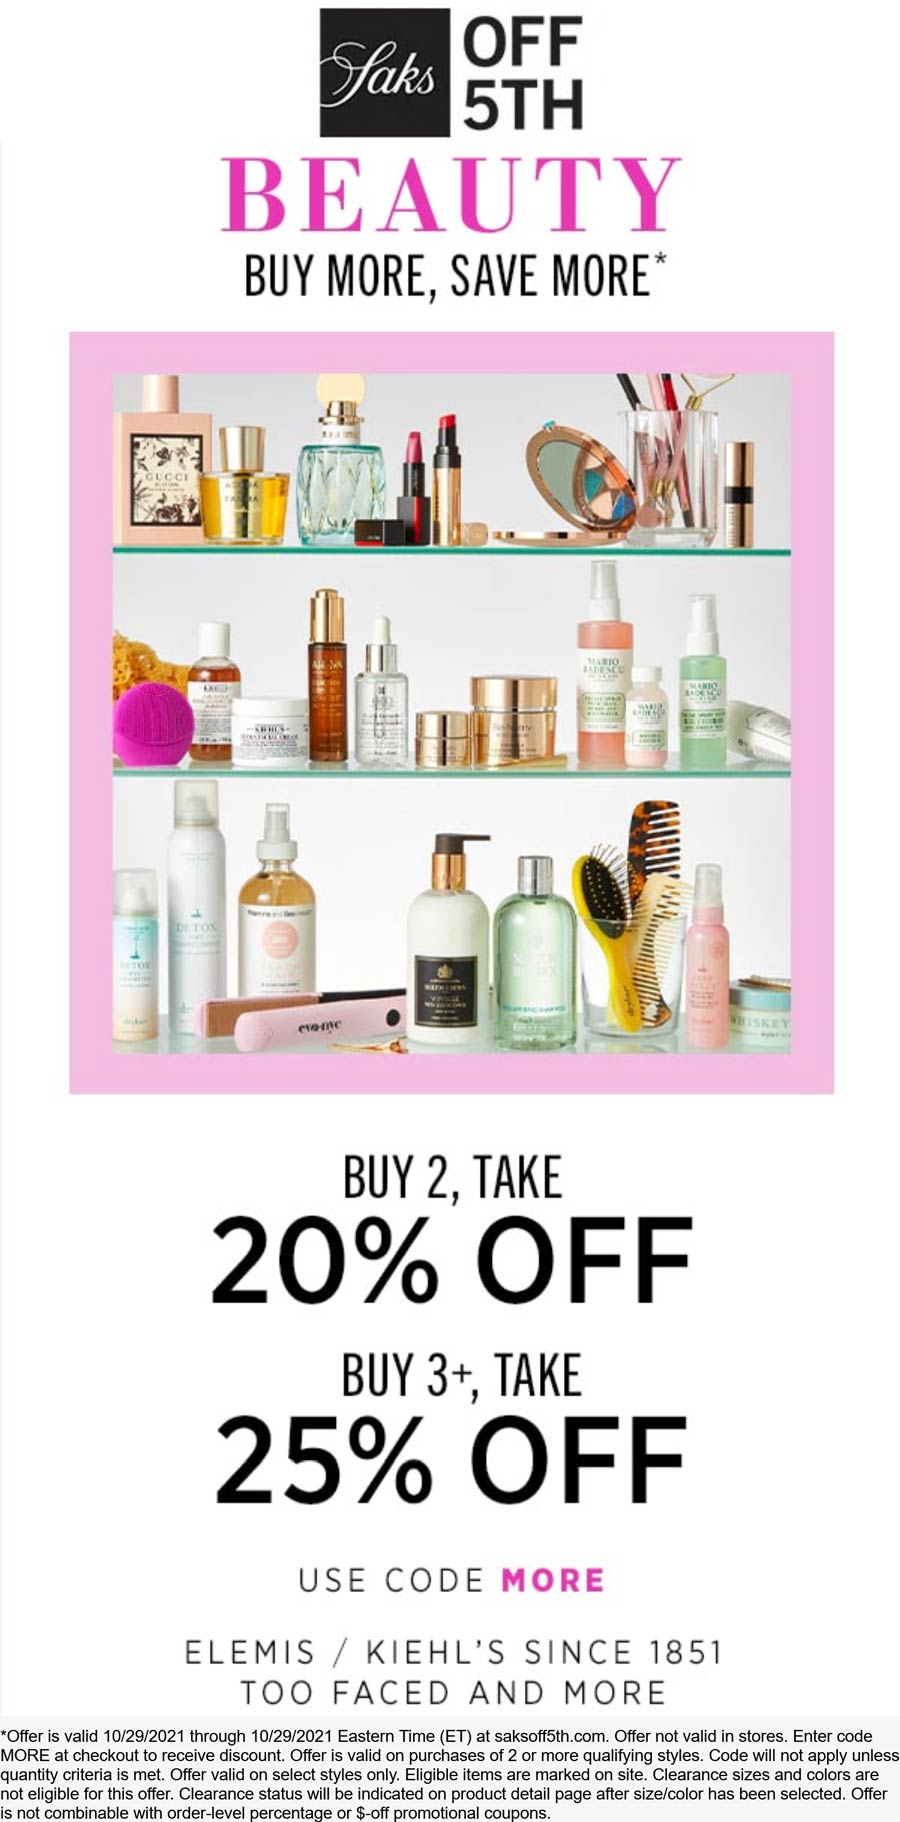 OFF 5TH stores Coupon  25% off beauty online today at Saks OFF 5TH via promo code MORE #off5th 